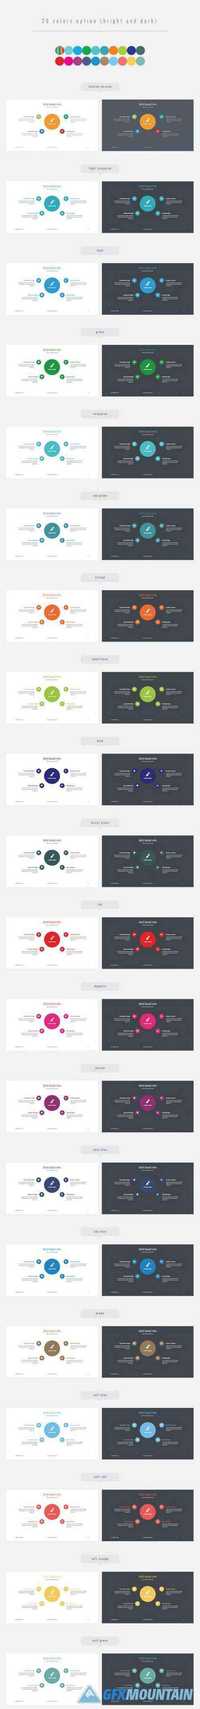 Amazing PowerPoint Template 368235